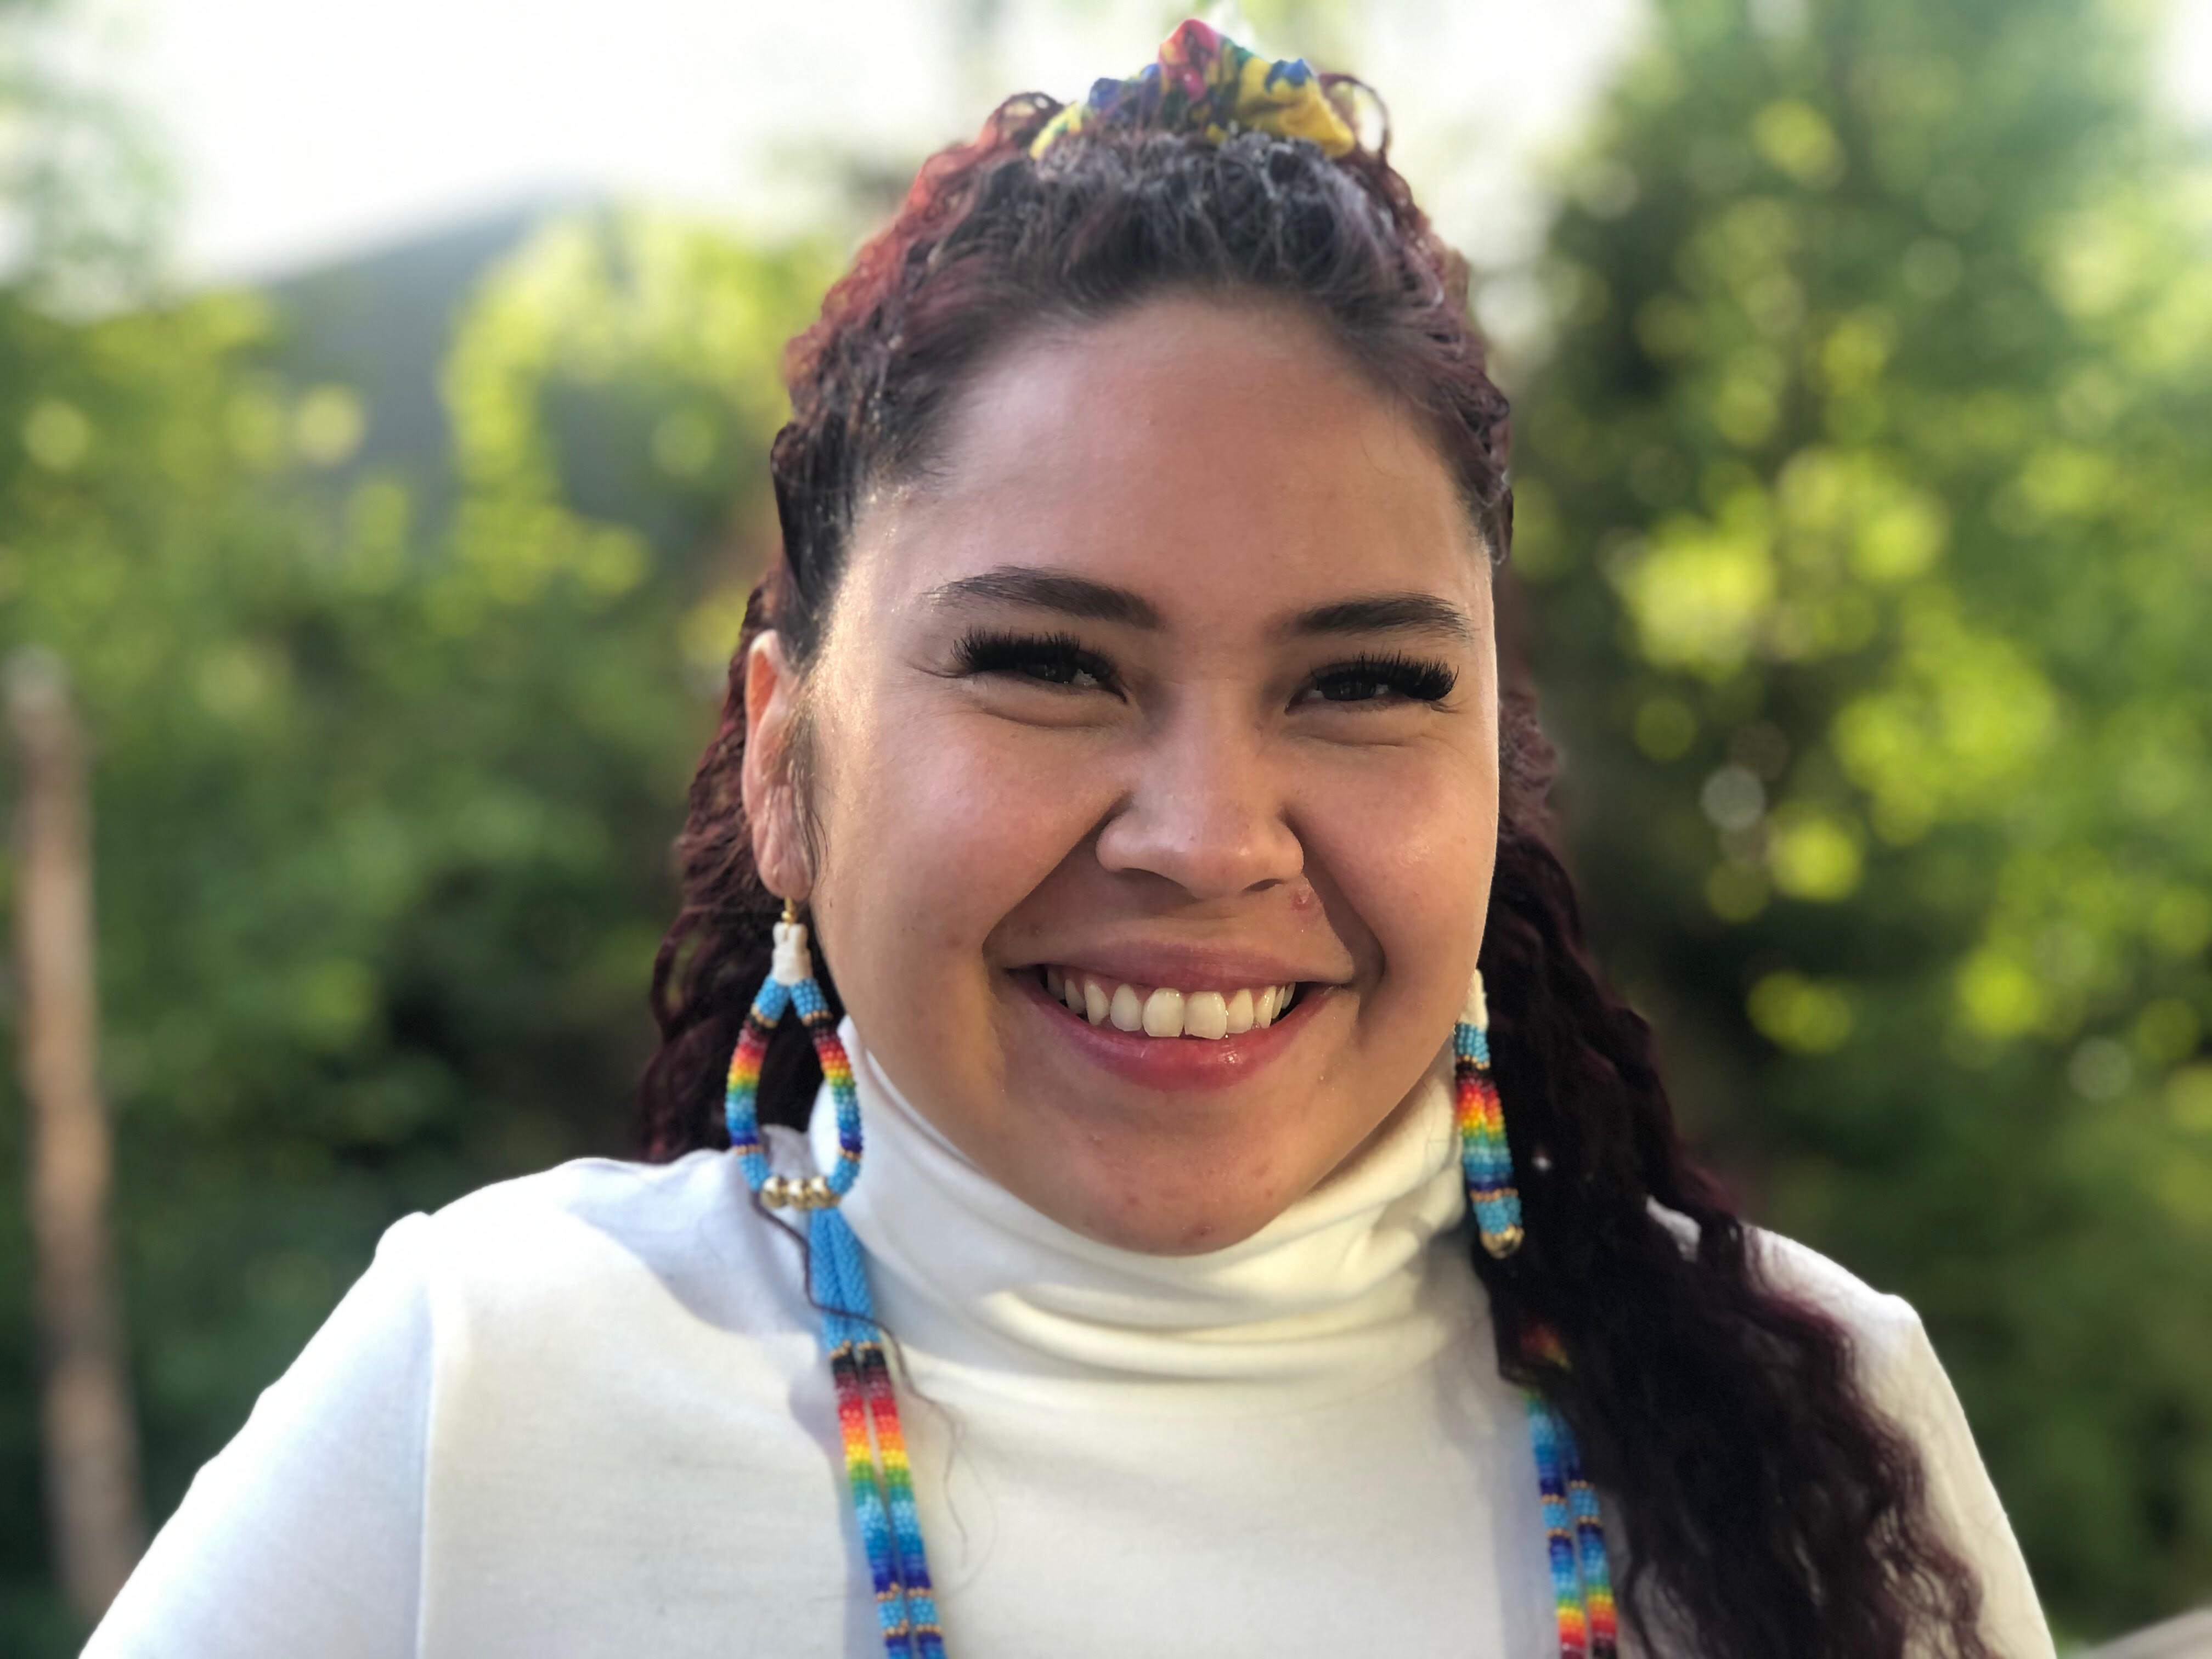 Santana, a smiling woman adorned with colorful Native American jewelry earring and matching necklace, stands outside on a sunny day.